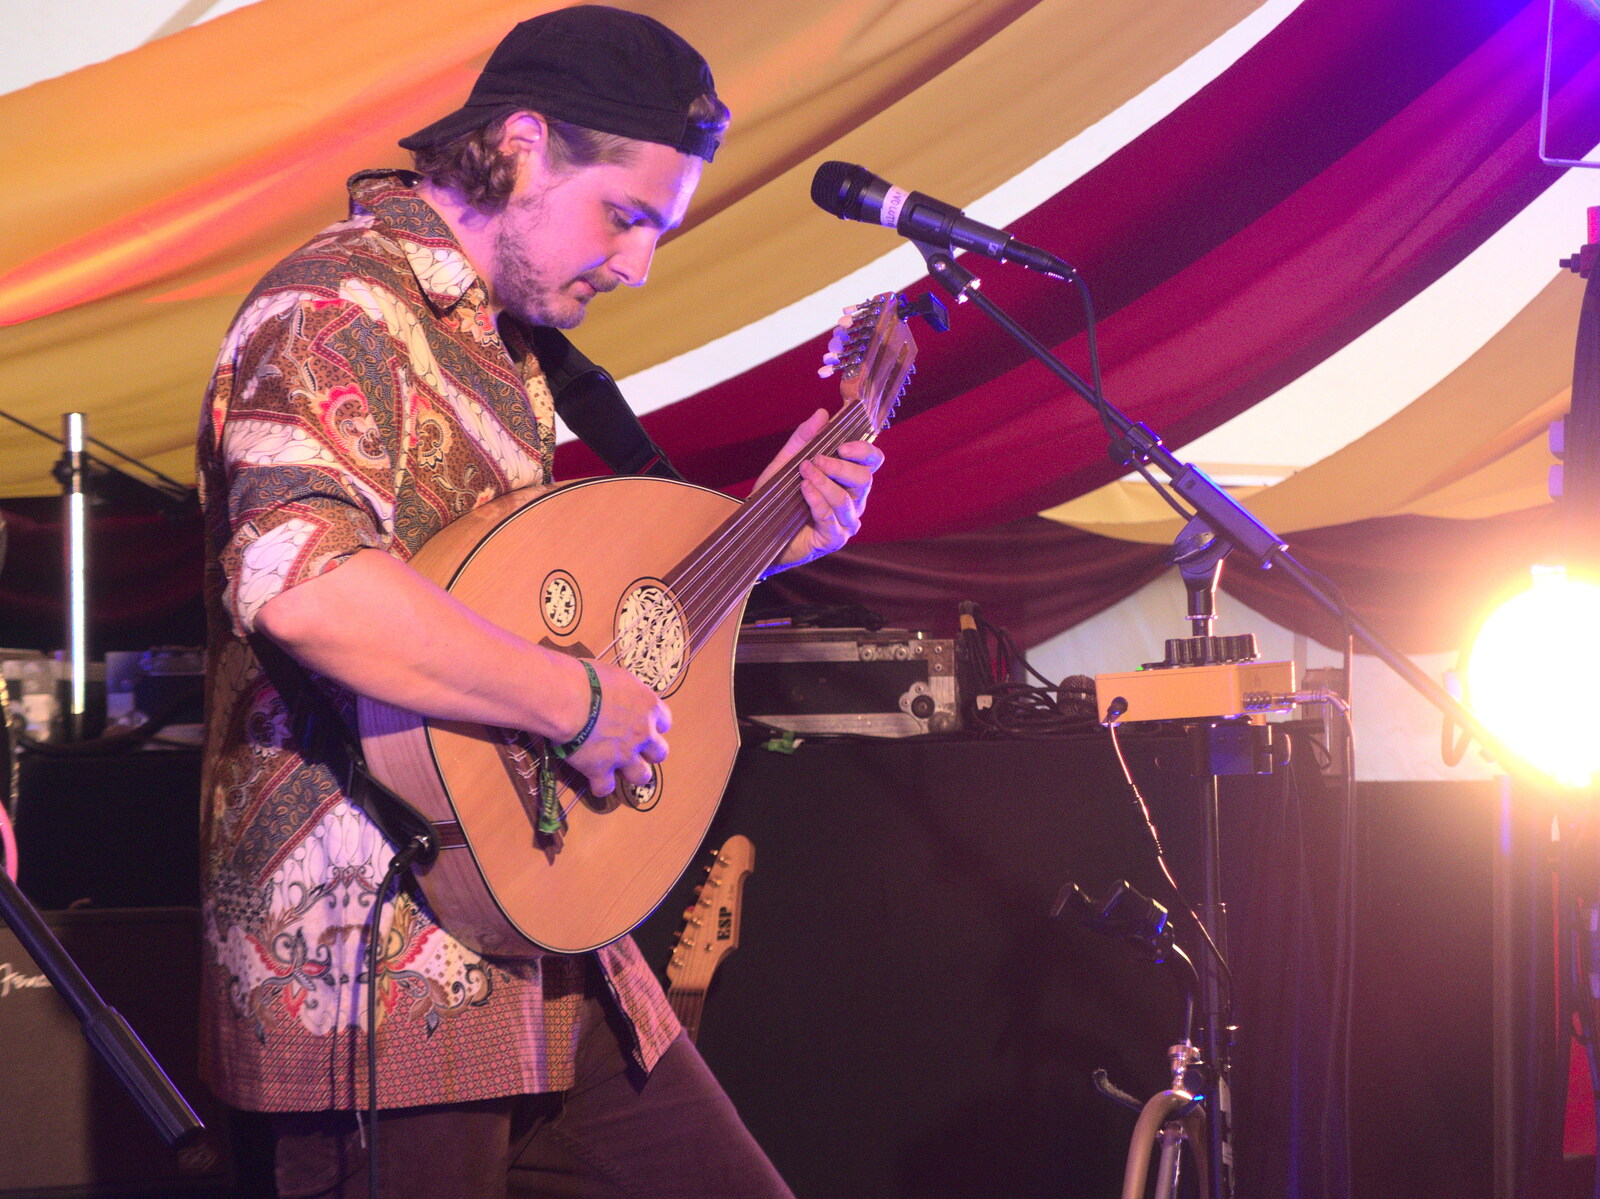 Traditional music action from Maui Waui Festival, Hill Farm, Gressenhall, Norfolk - 28th August 2021